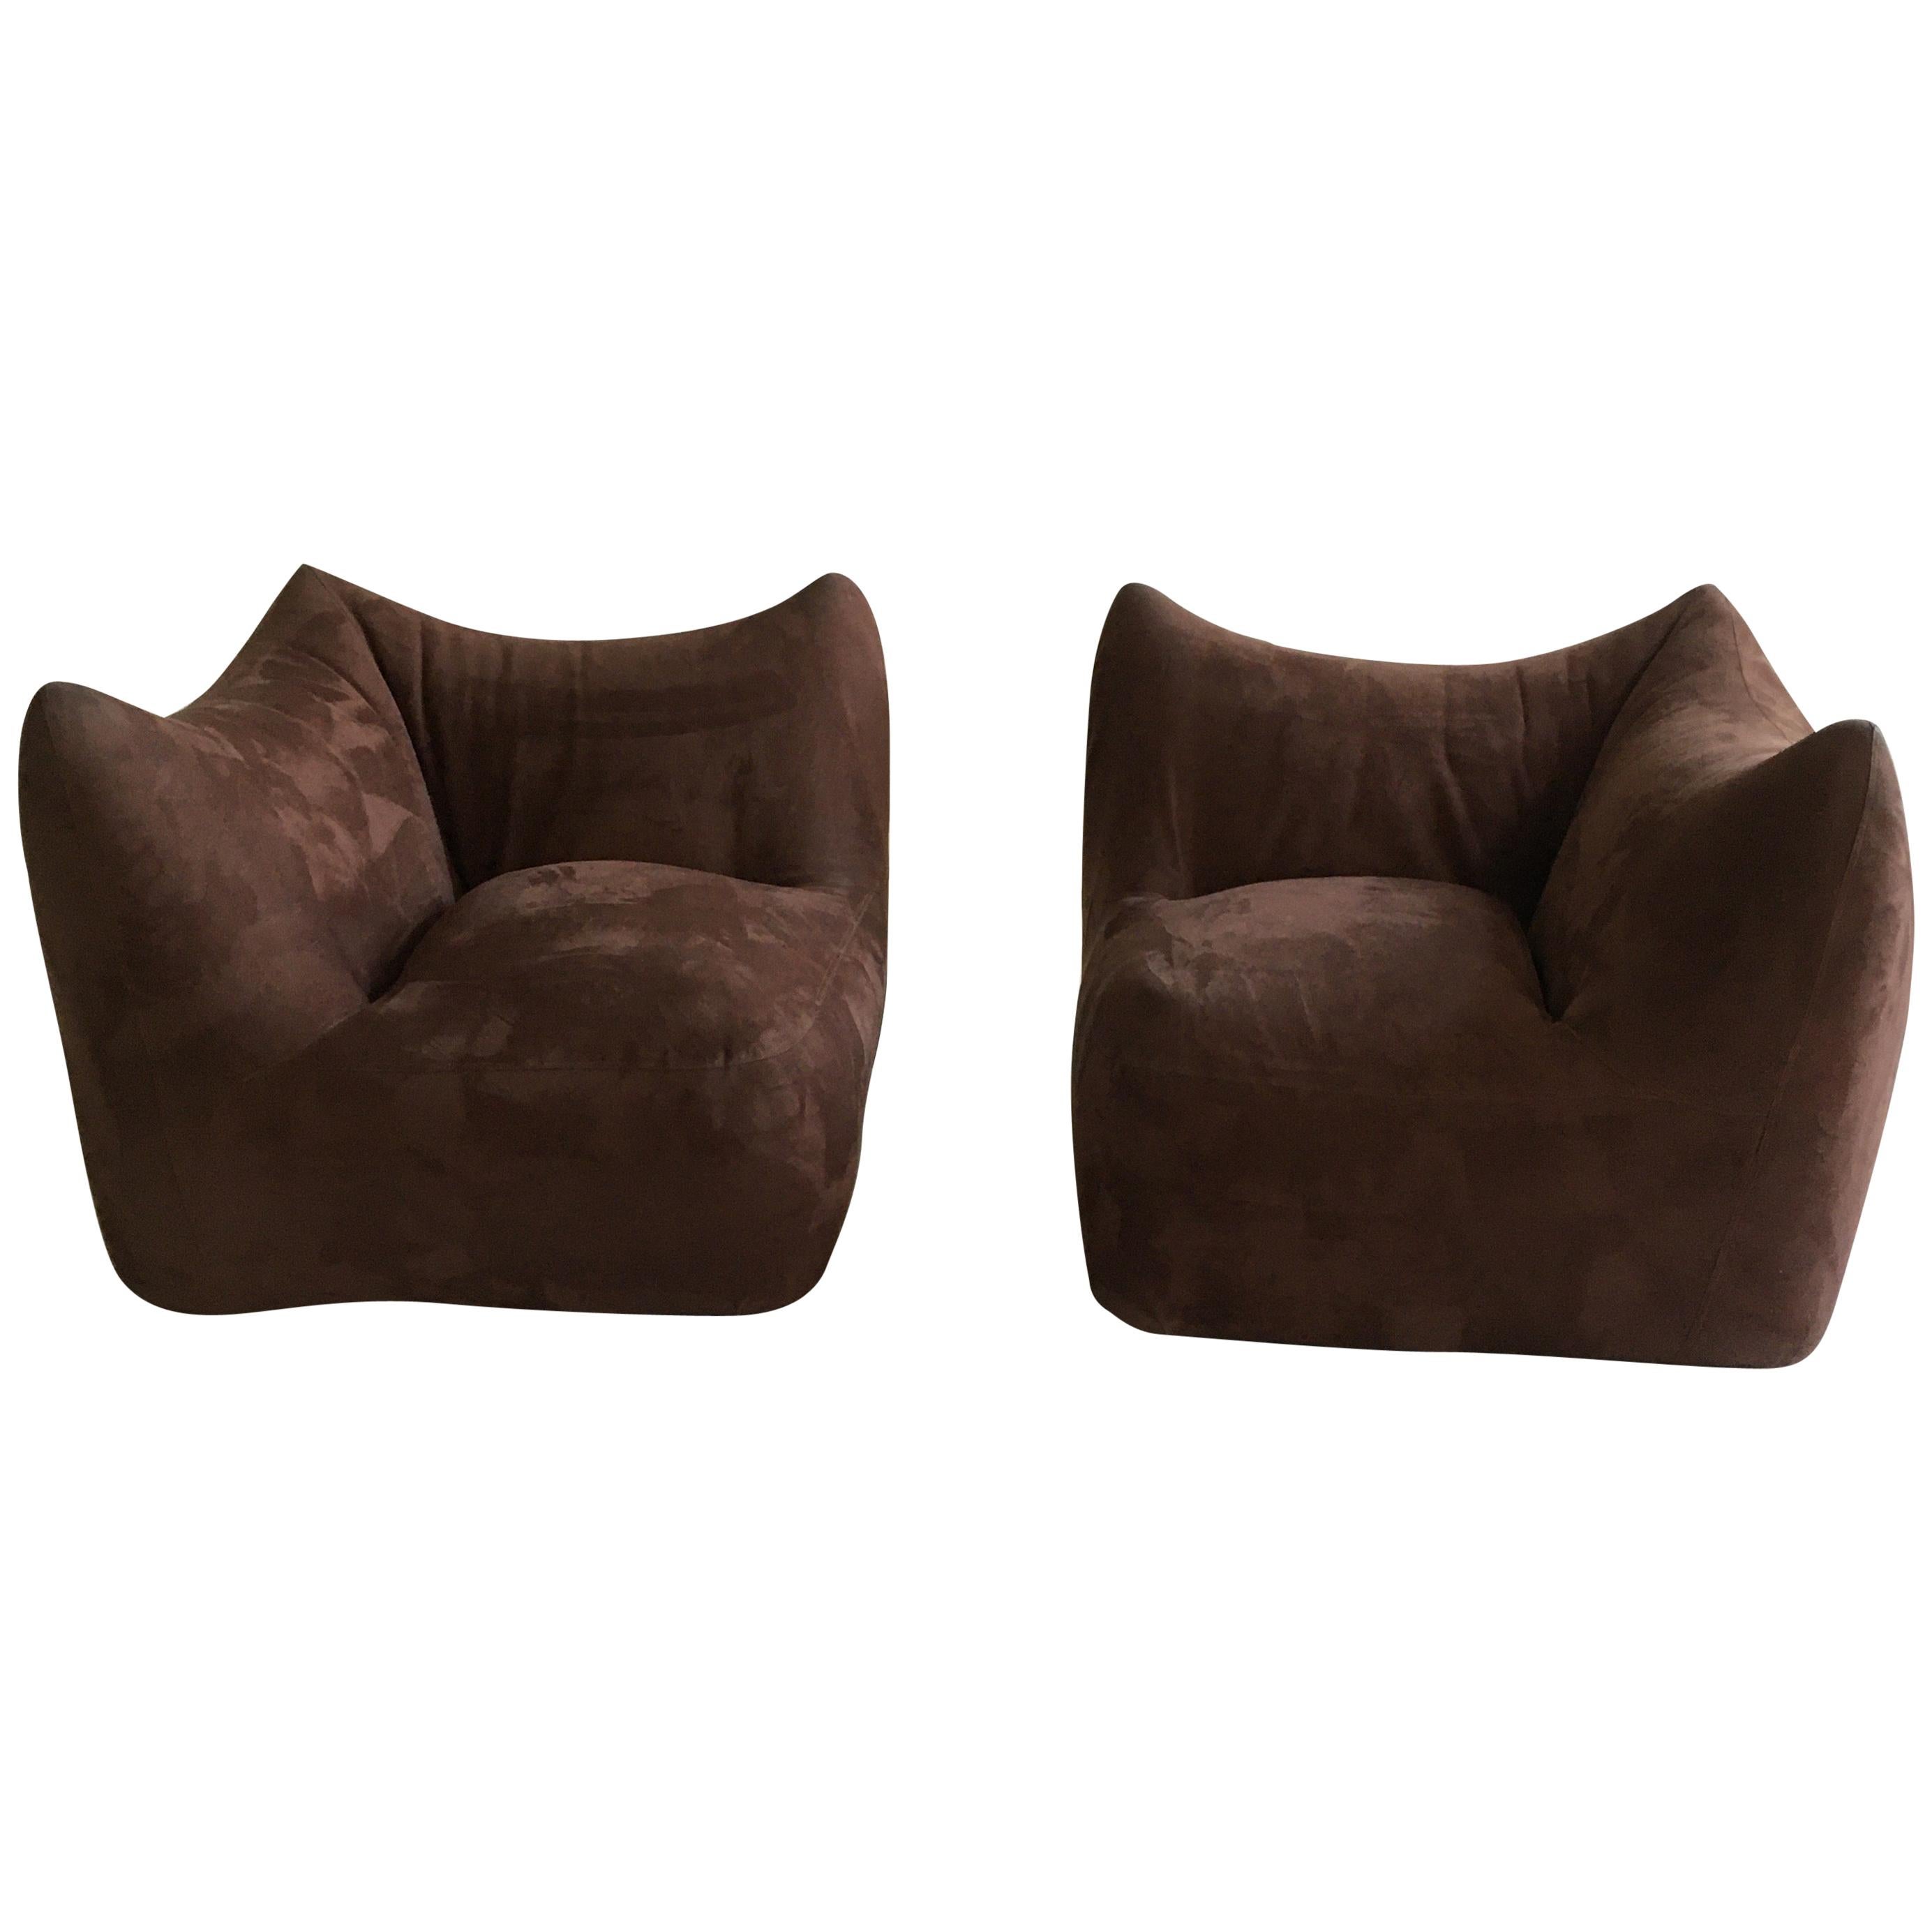 Mario Bellini 'Le Bambole' Two Modular Elements, Pair of Lounge Chairs, Italy